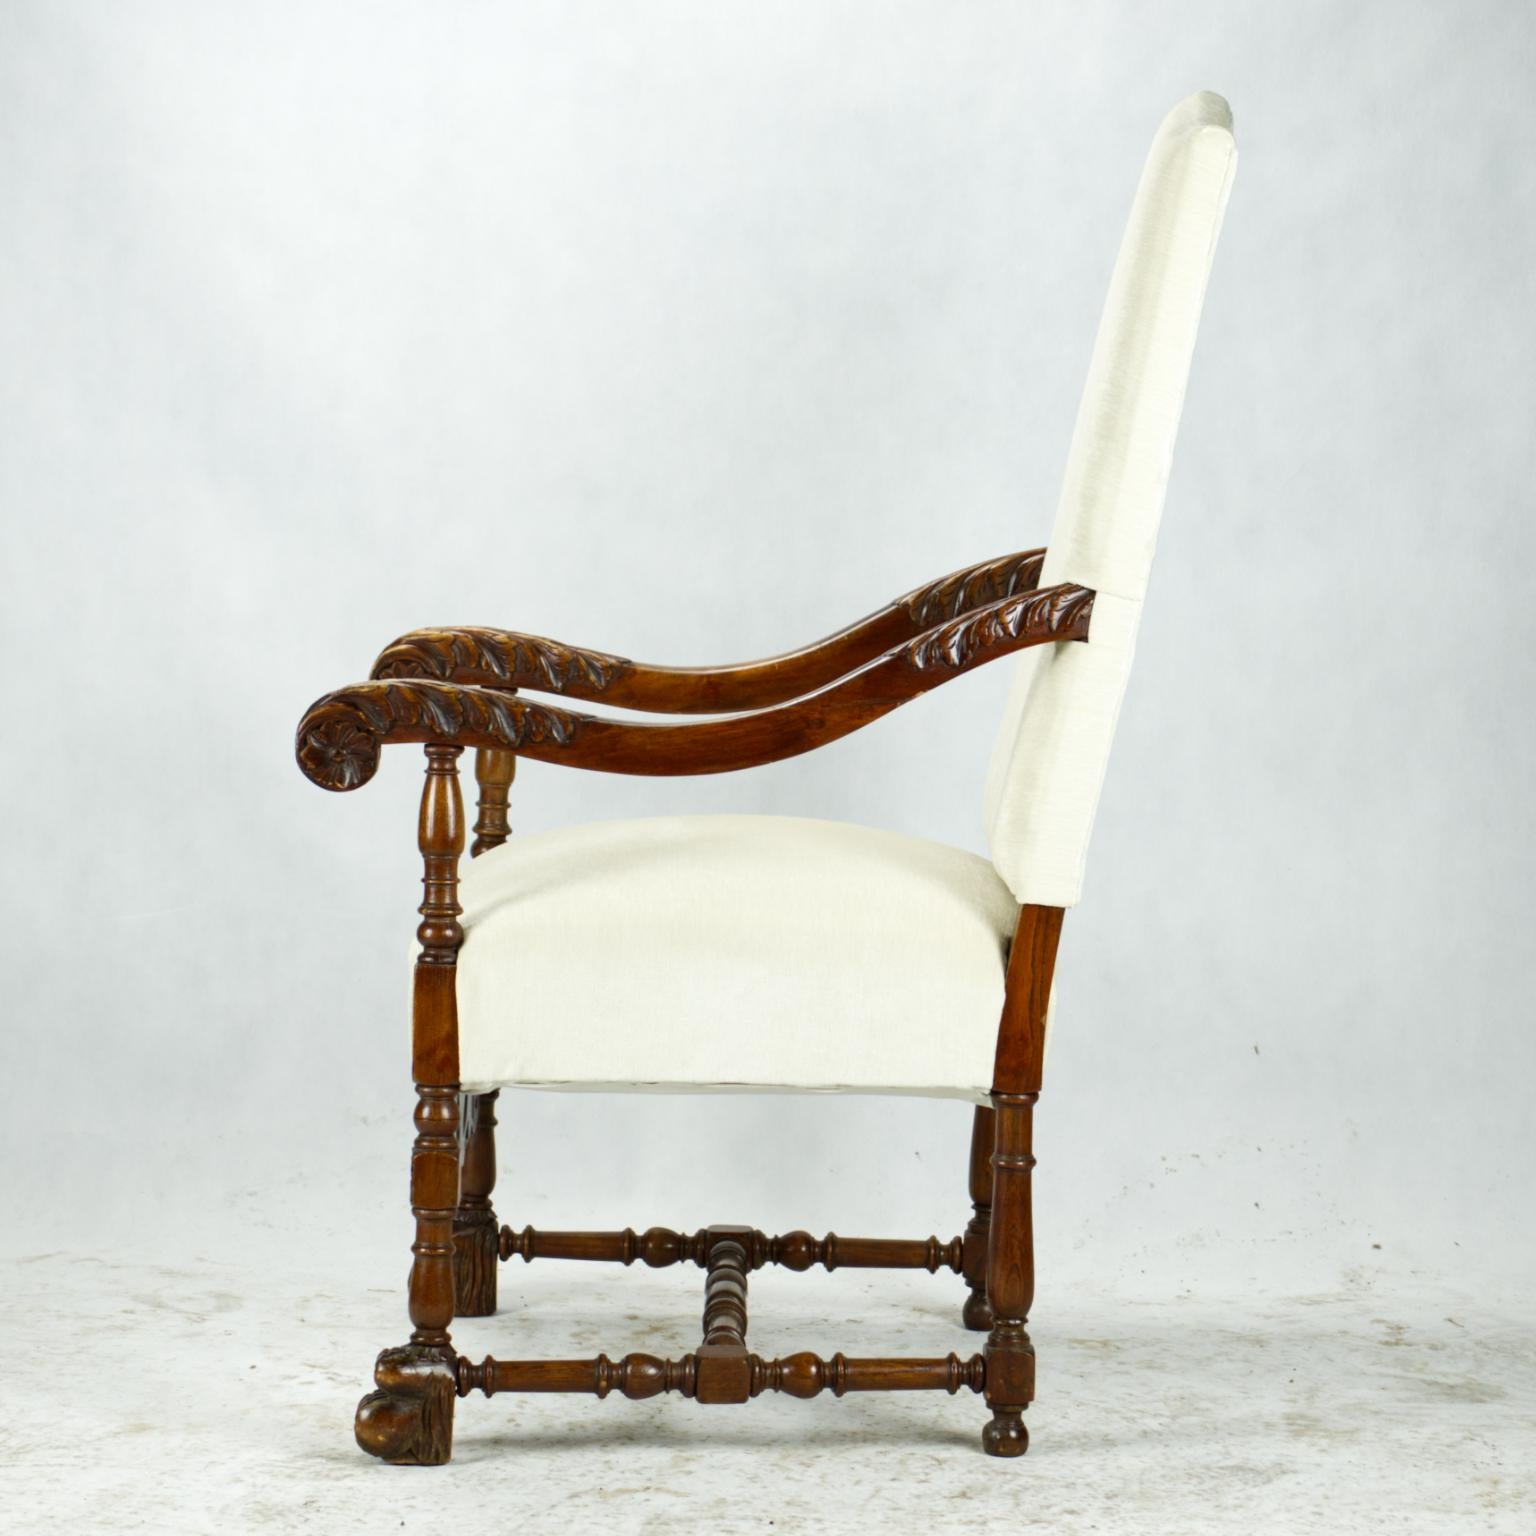 Antique hand carved Louis XII highback armchair, late 19th century.
New upholstery.